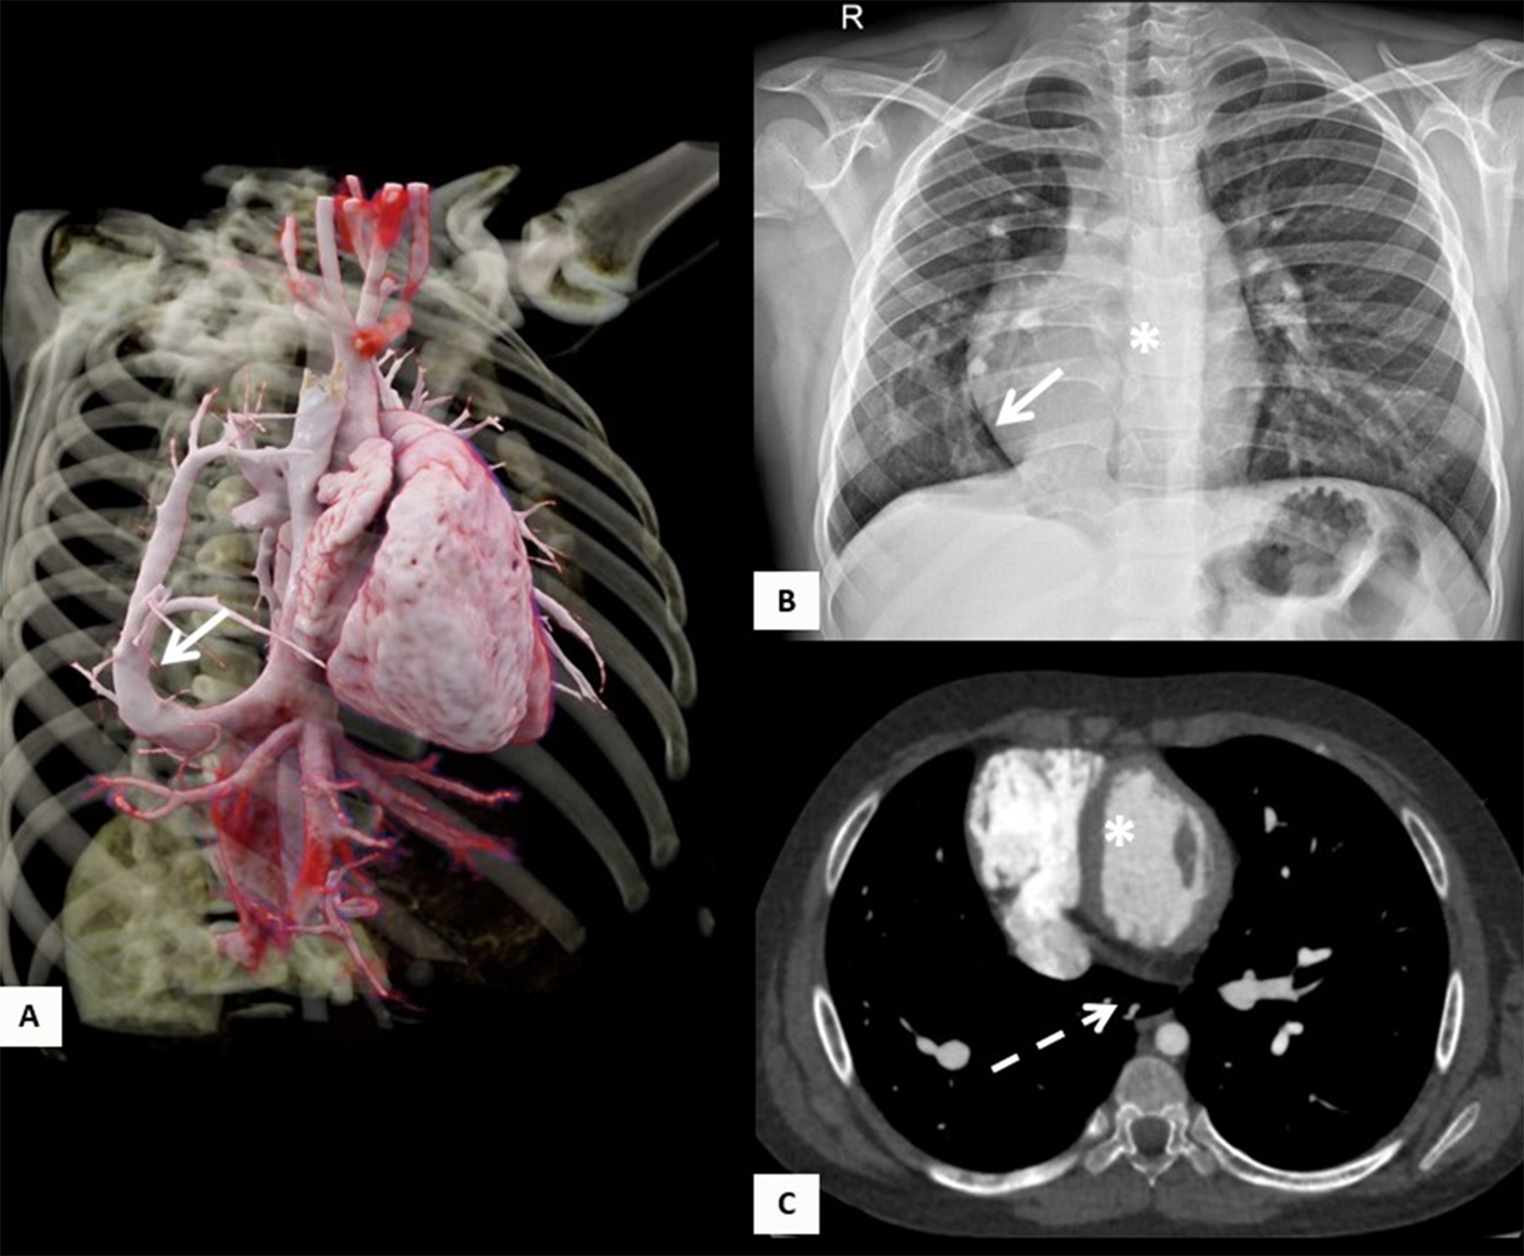 Clinical characteristics, imaging findings, management, and outcomes of patients with scimitar syndrome at a tertiary referral healthcare center in Colombia